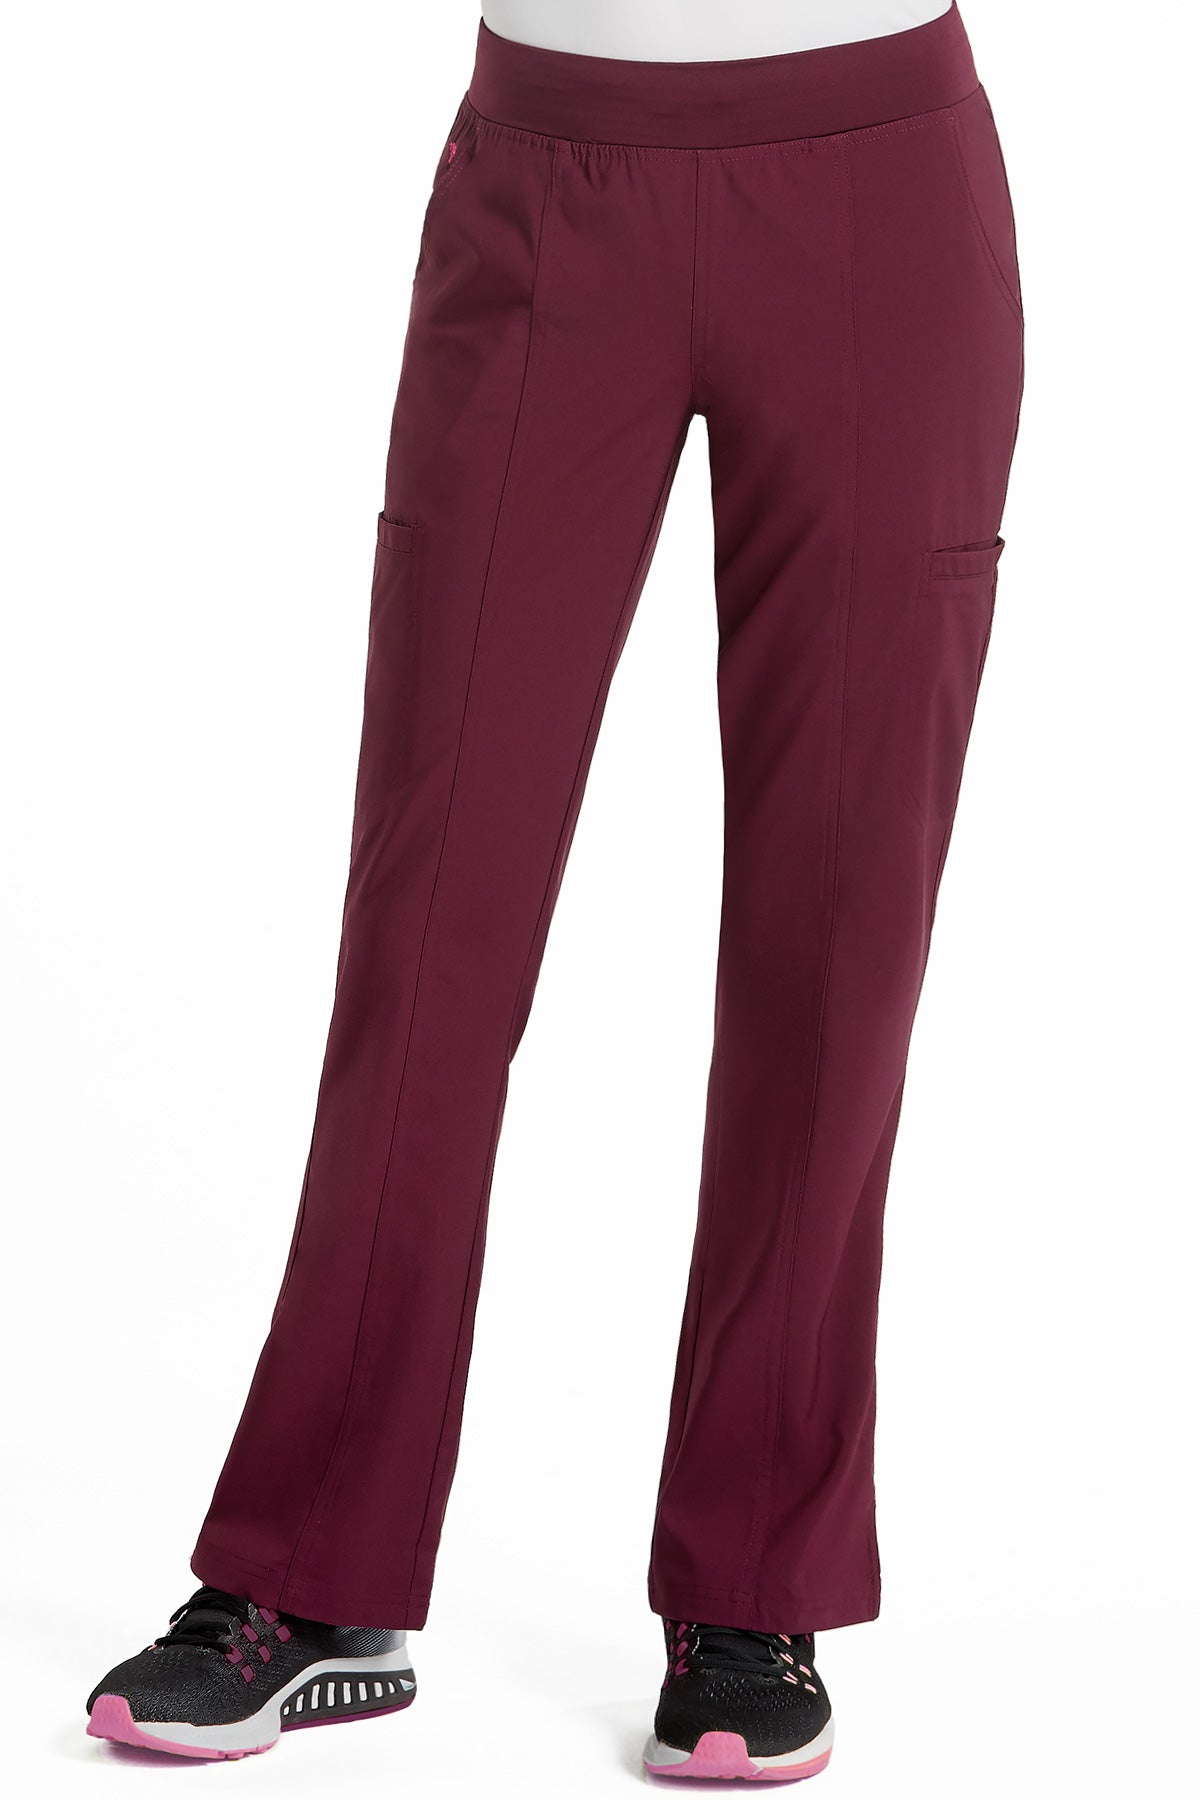 Med Couture Scrub Pants Activate Clearance